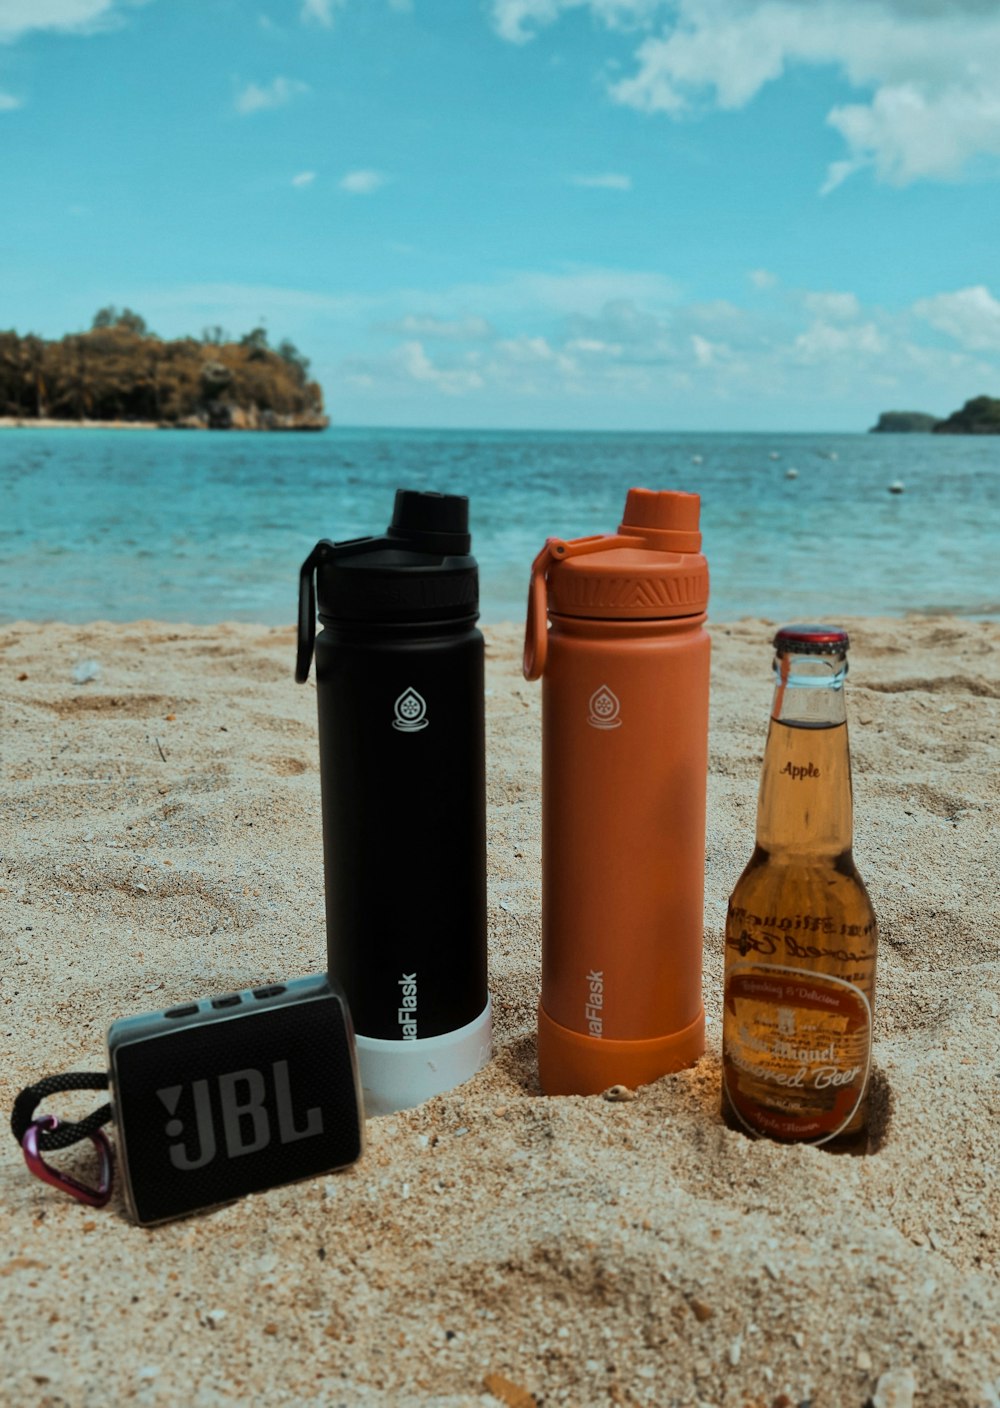 a bottle of beer and a bottle of beer on the beach